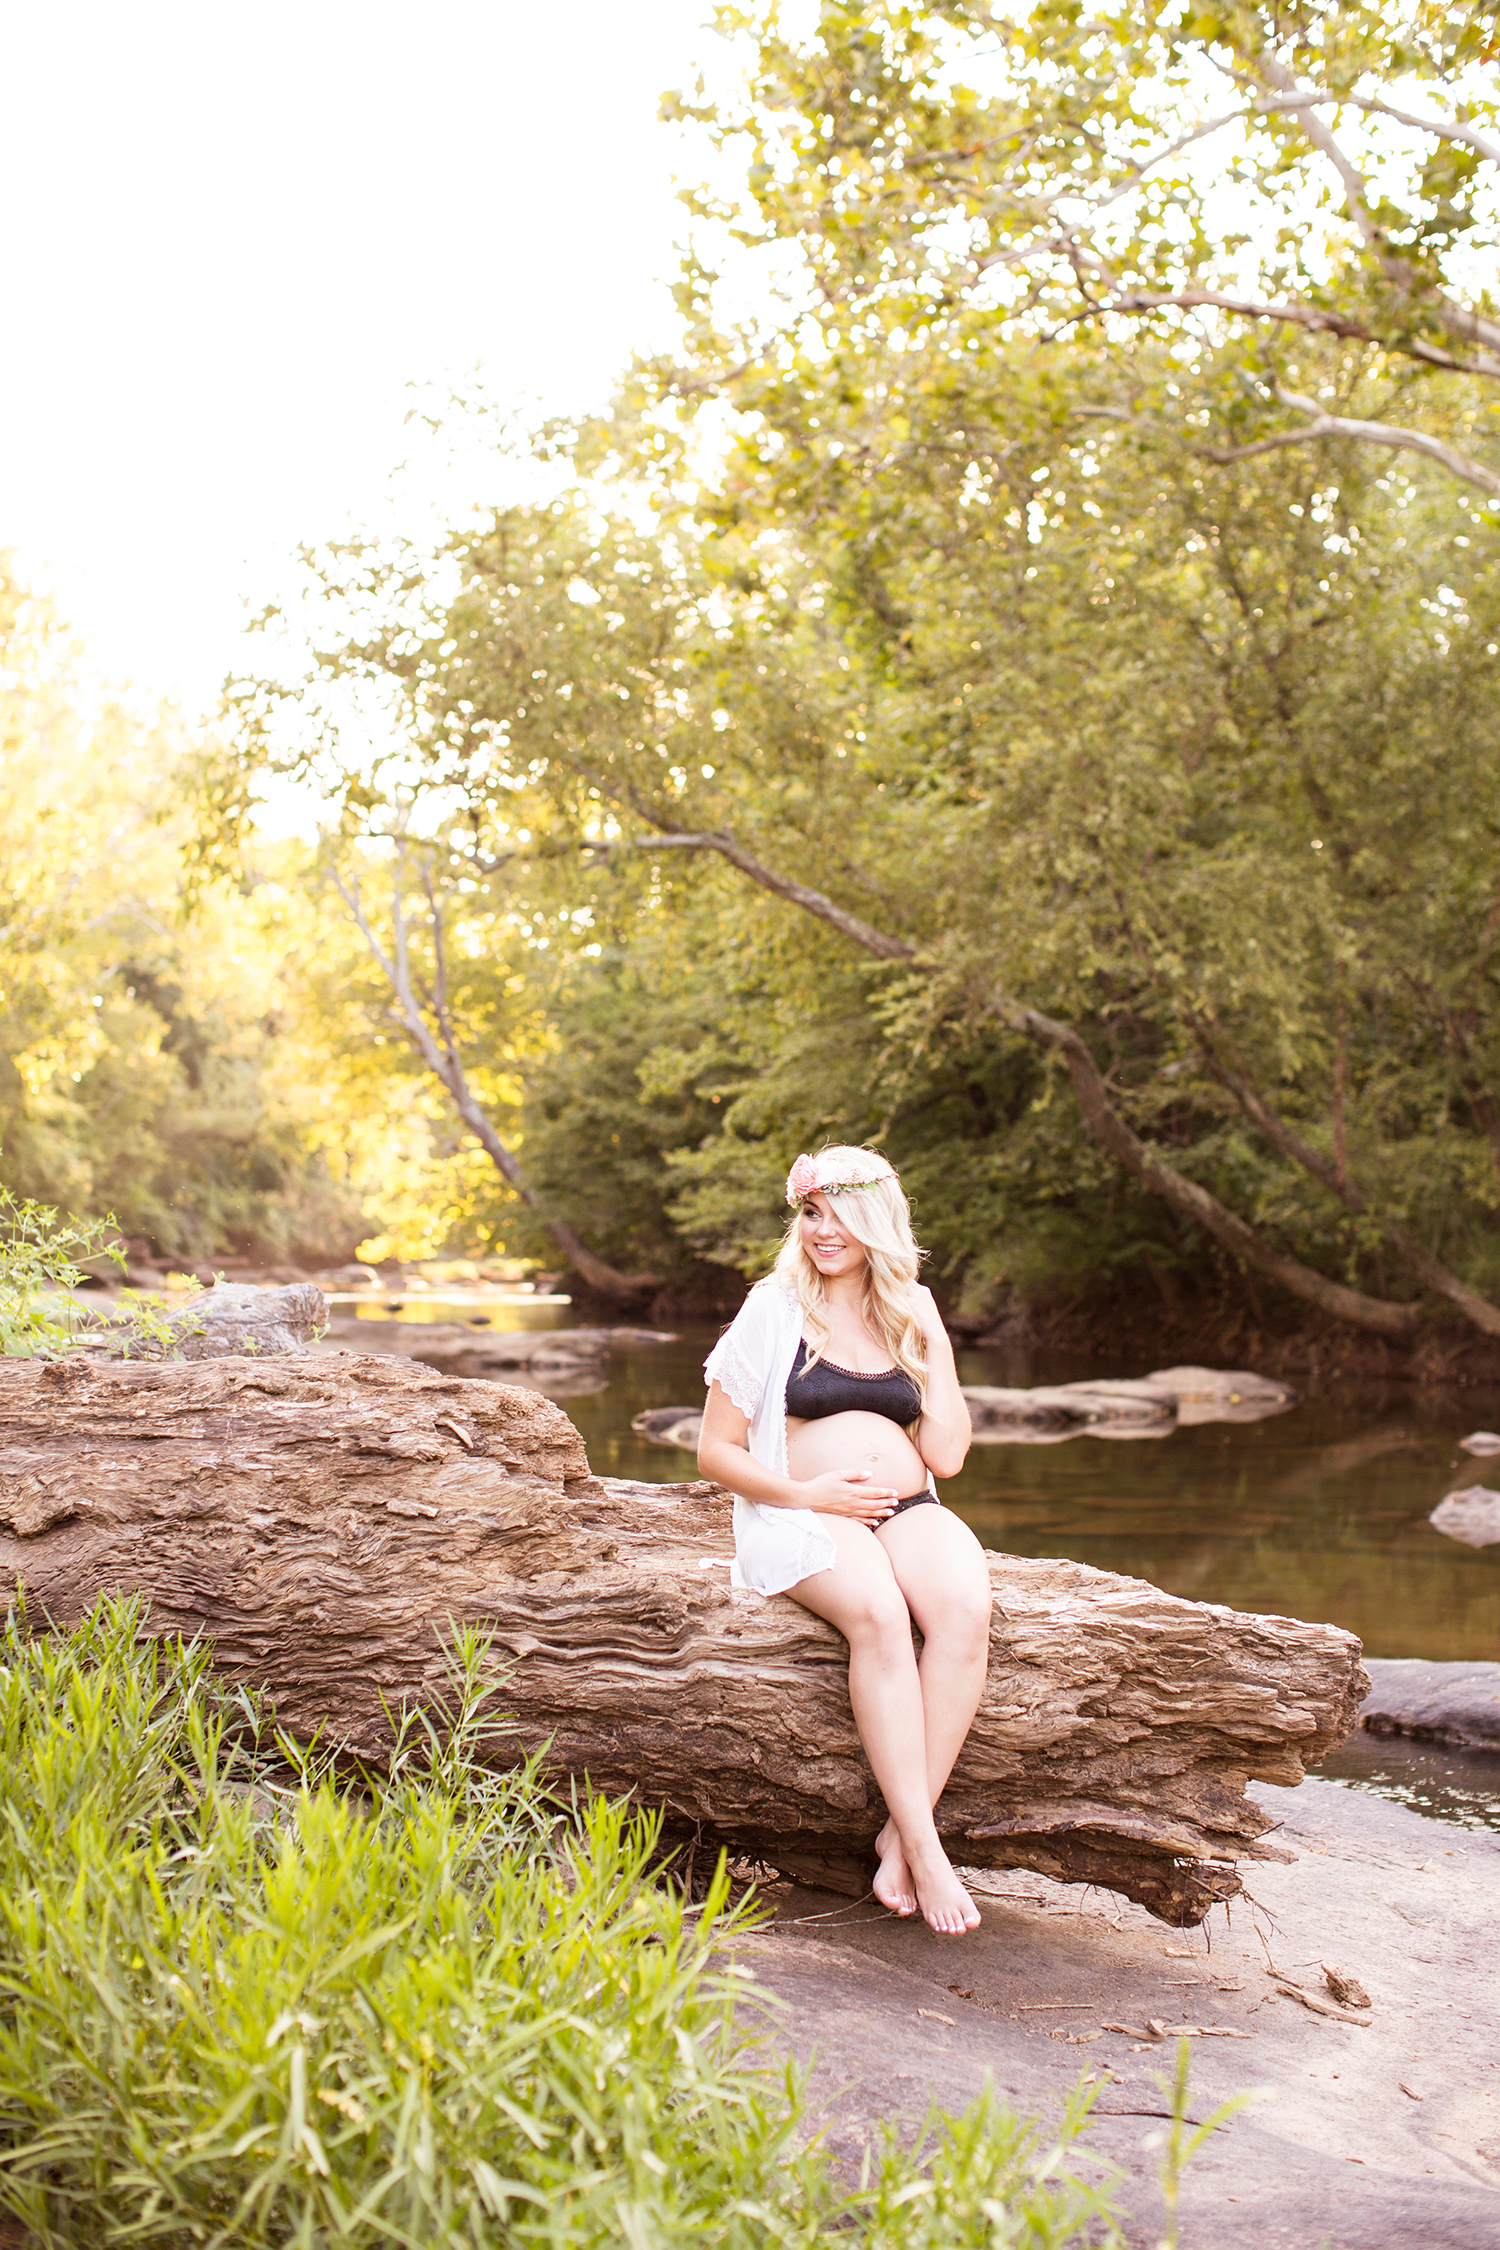 Outdoor Maternity Boudoir on the River - Image Property of www.j-dphoto.com